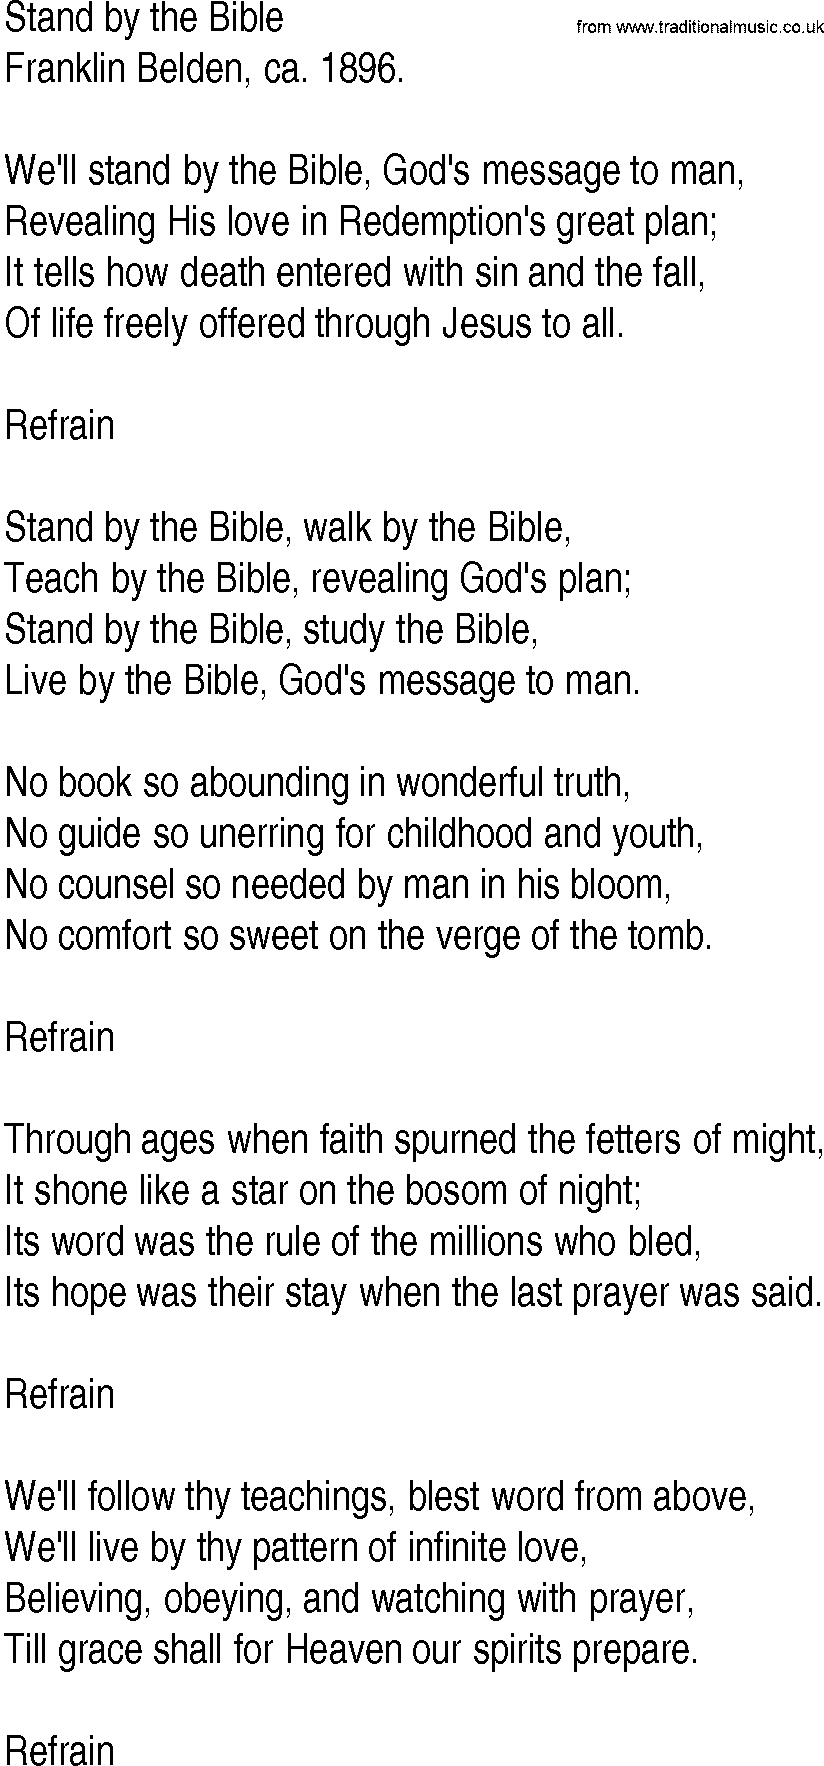 Hymn and Gospel Song: Stand by the Bible by Franklin Belden ca lyrics